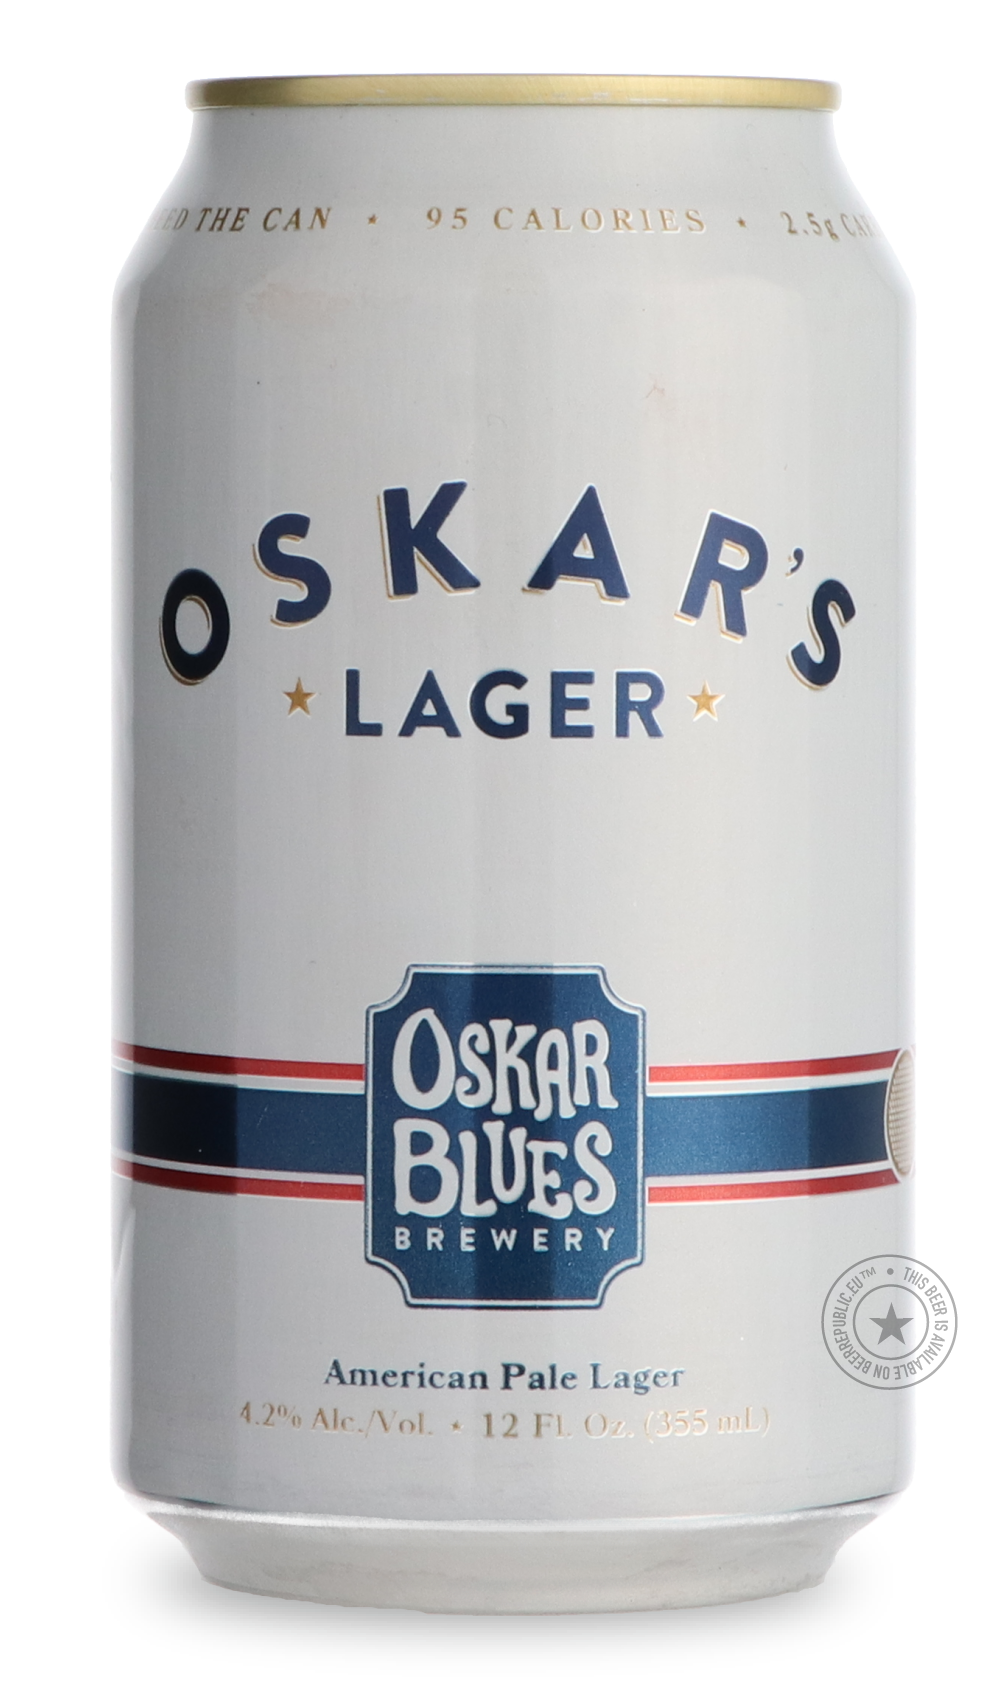 -Oskar Blues- Oskar's Lager-Pale- Only @ Beer Republic - The best online beer store for American & Canadian craft beer - Buy beer online from the USA and Canada - Bier online kopen - Amerikaans bier kopen - Craft beer store - Craft beer kopen - Amerikanisch bier kaufen - Bier online kaufen - Acheter biere online - IPA - Stout - Porter - New England IPA - Hazy IPA - Imperial Stout - Barrel Aged - Barrel Aged Imperial Stout - Brown - Dark beer - Blond - Blonde - Pilsner - Lager - Wheat - Weizen - Amber - Barl